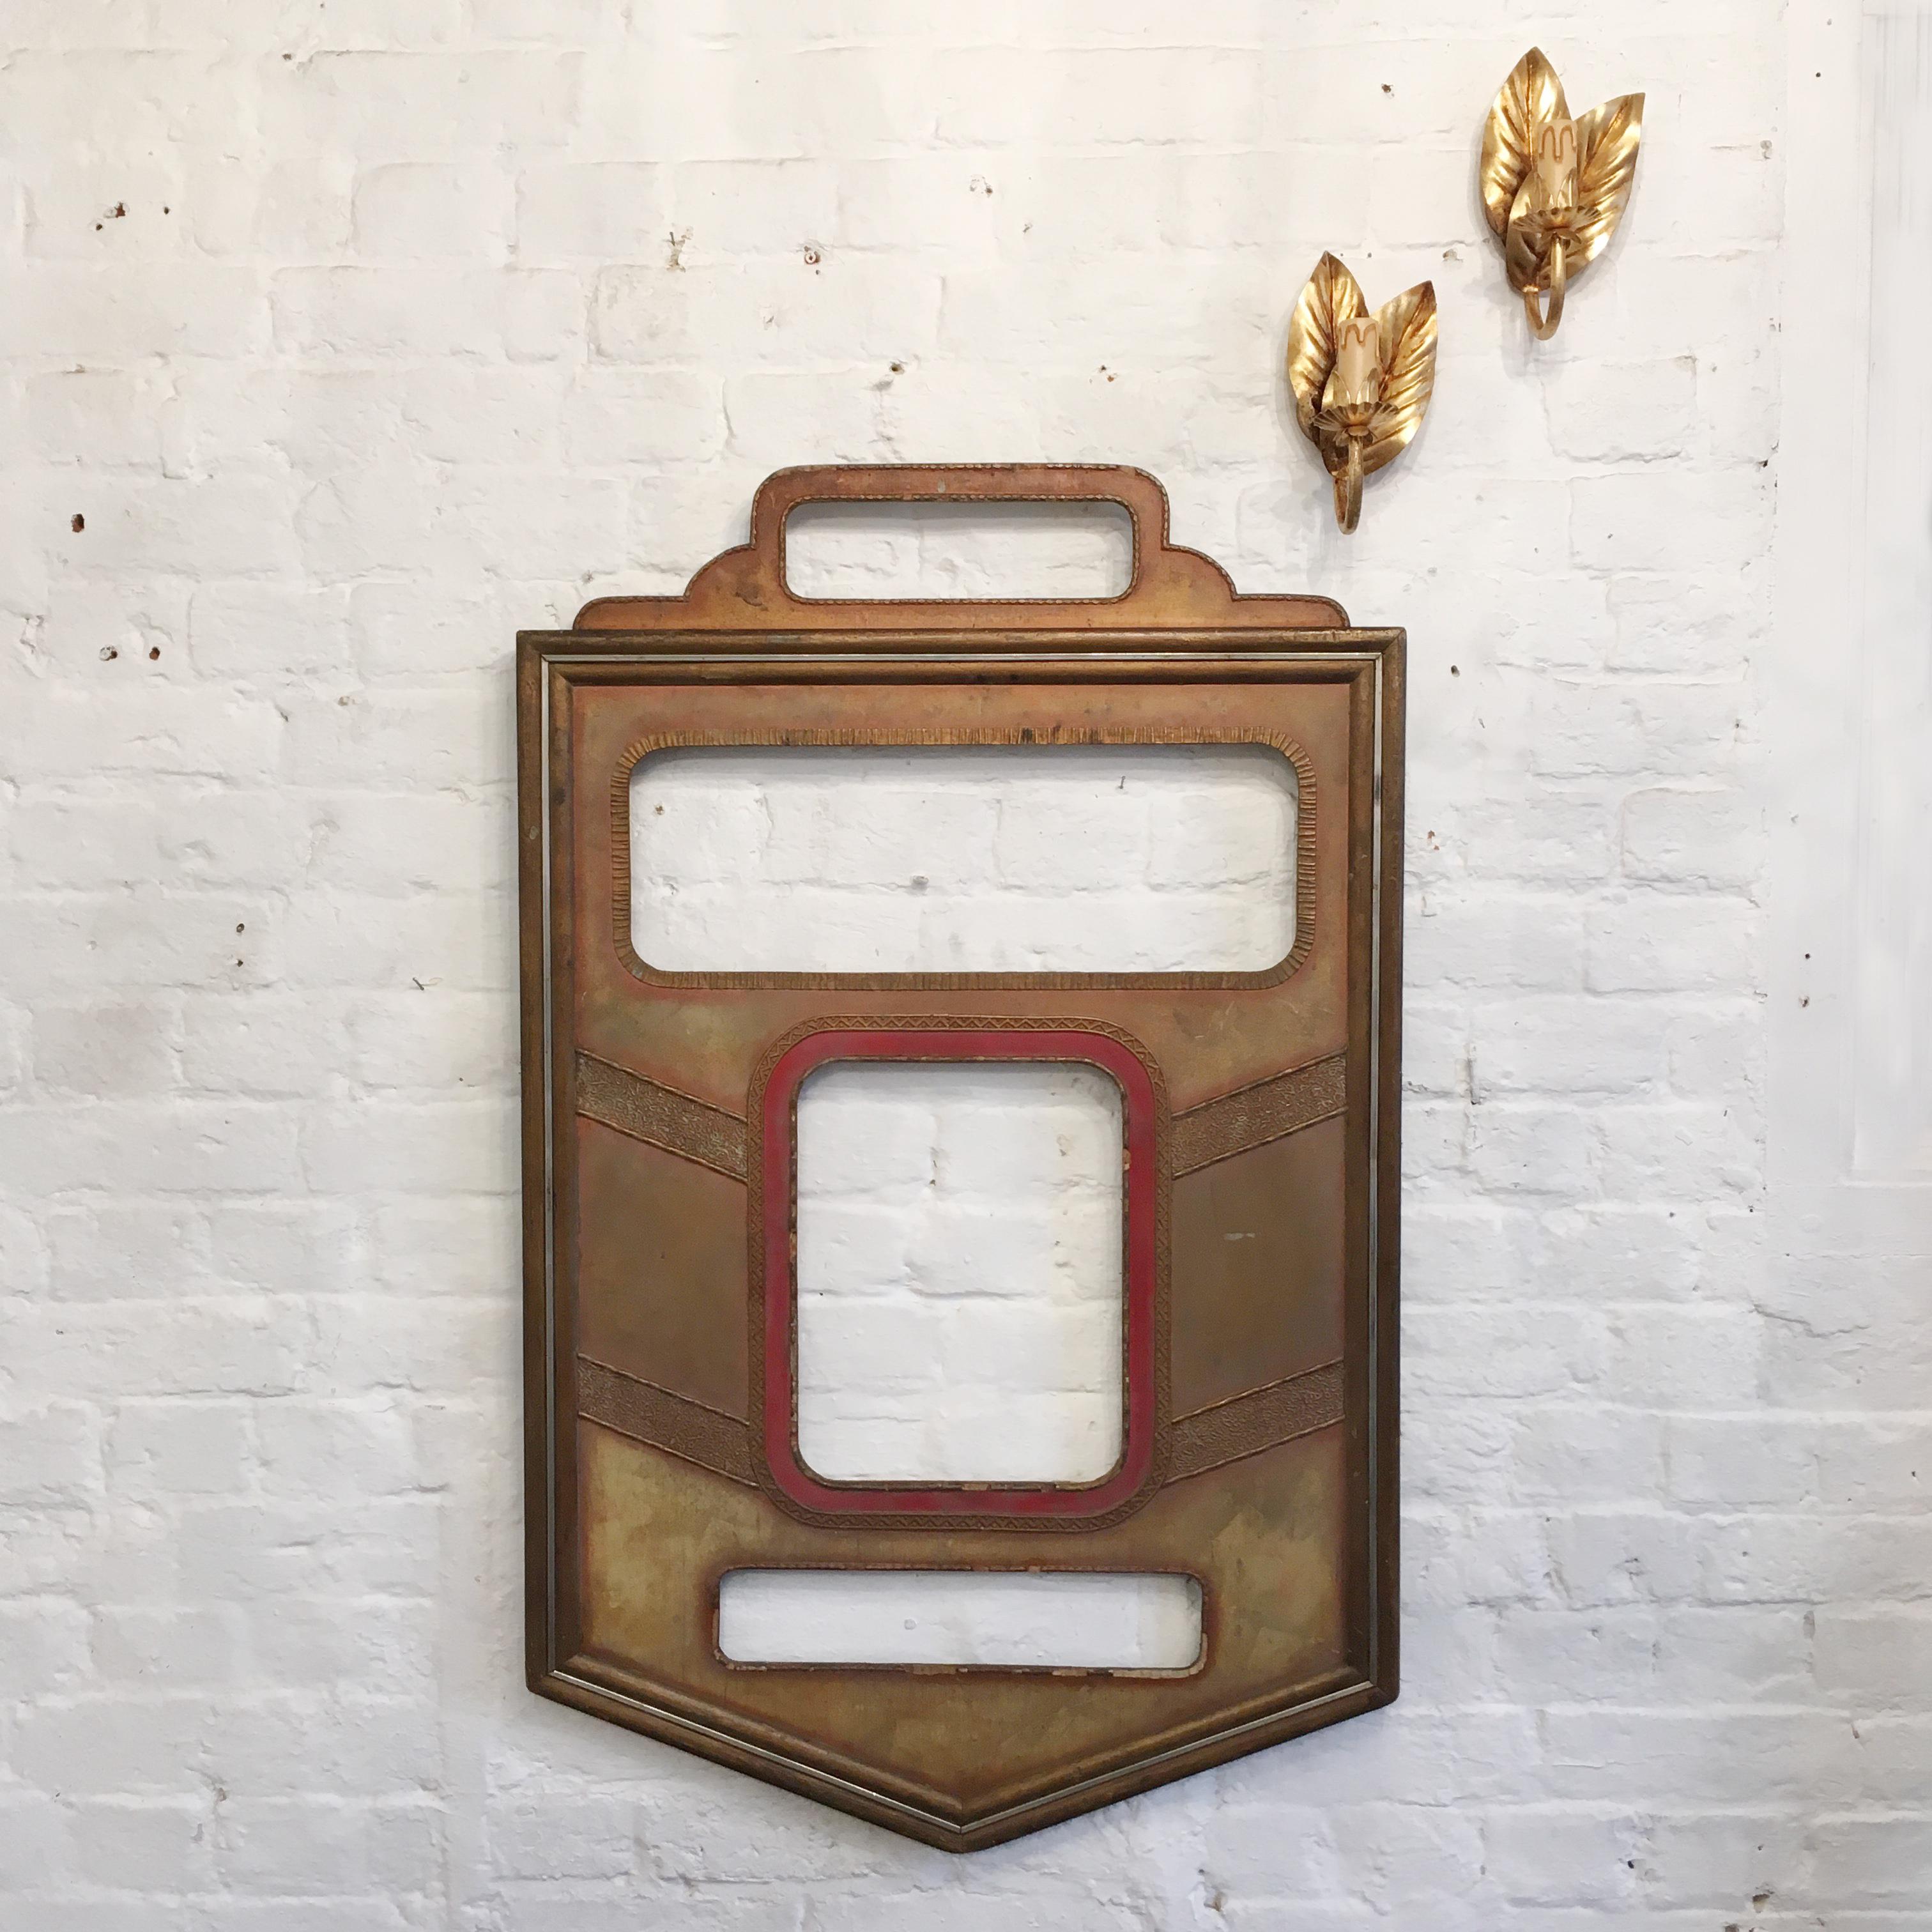 1920s Art Deco wooden theatre/cinema poster frame.
This genuine piece was salvaged from an old venue in Margate, on the south coast in the UK
Gold and red with textured finishes and metallic paint finish, metal border frame inside the edge
This